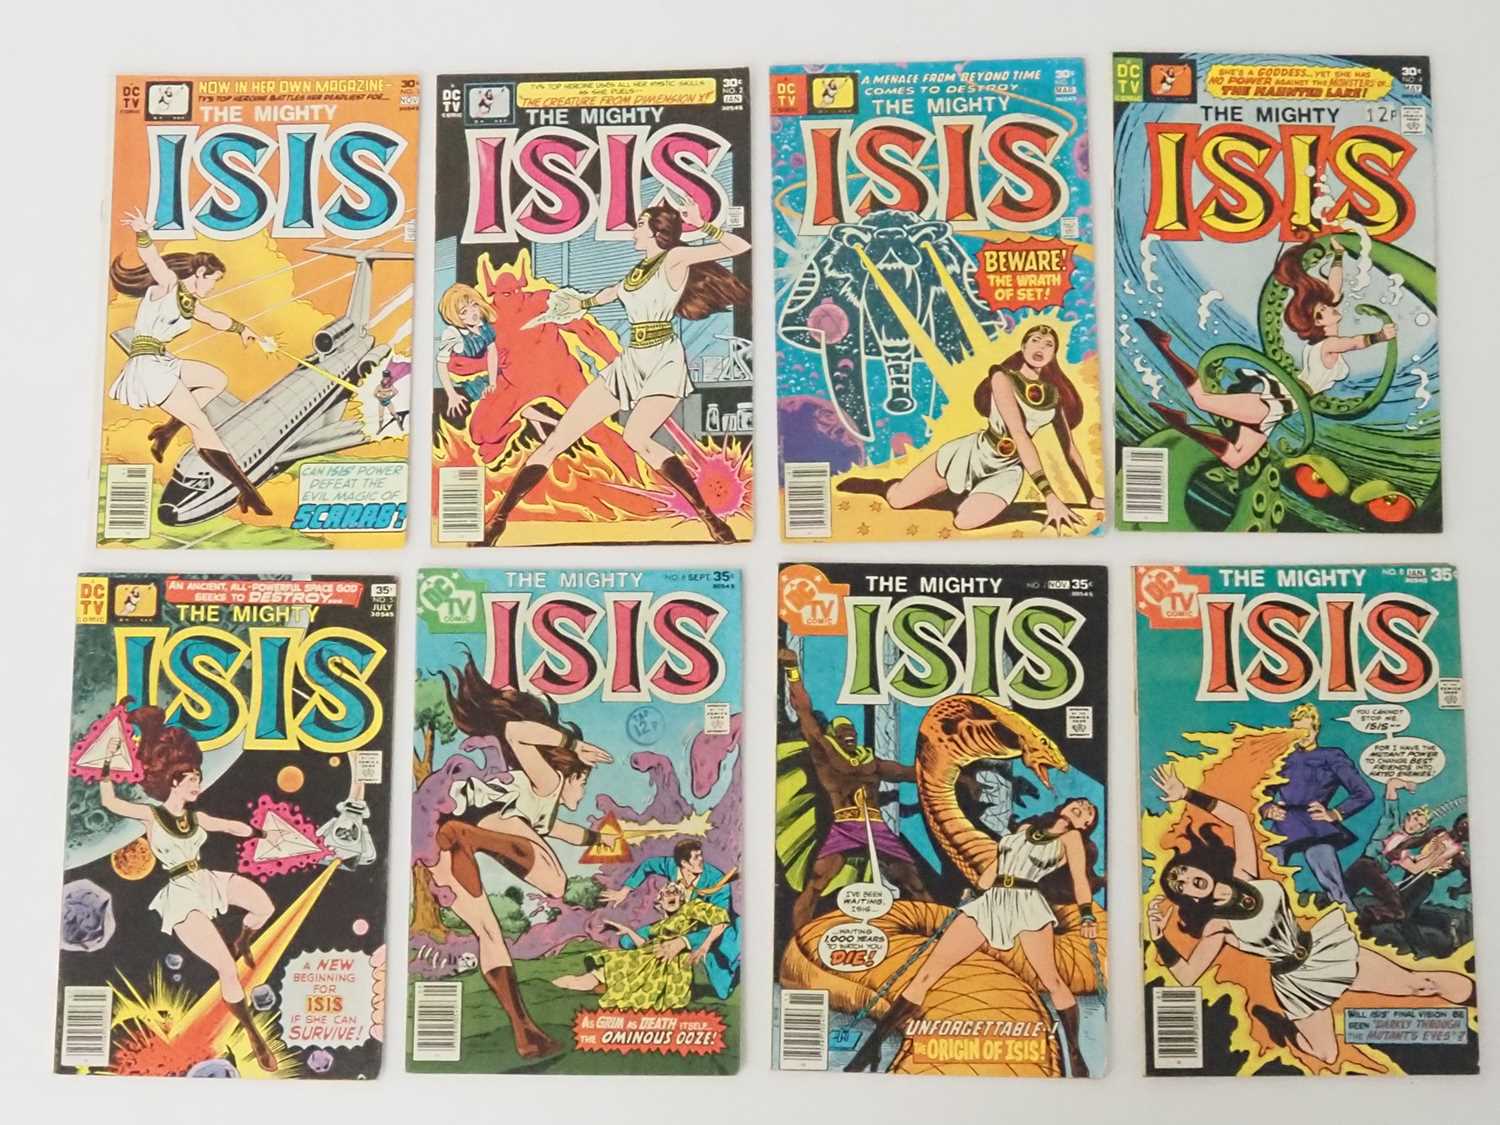 THE MIGHTY ISIS #1, 2, 3, 4, 5, 6, 7, 8 (8 in Lot) - (1976/1978 - DC) - Full complete run of the 8